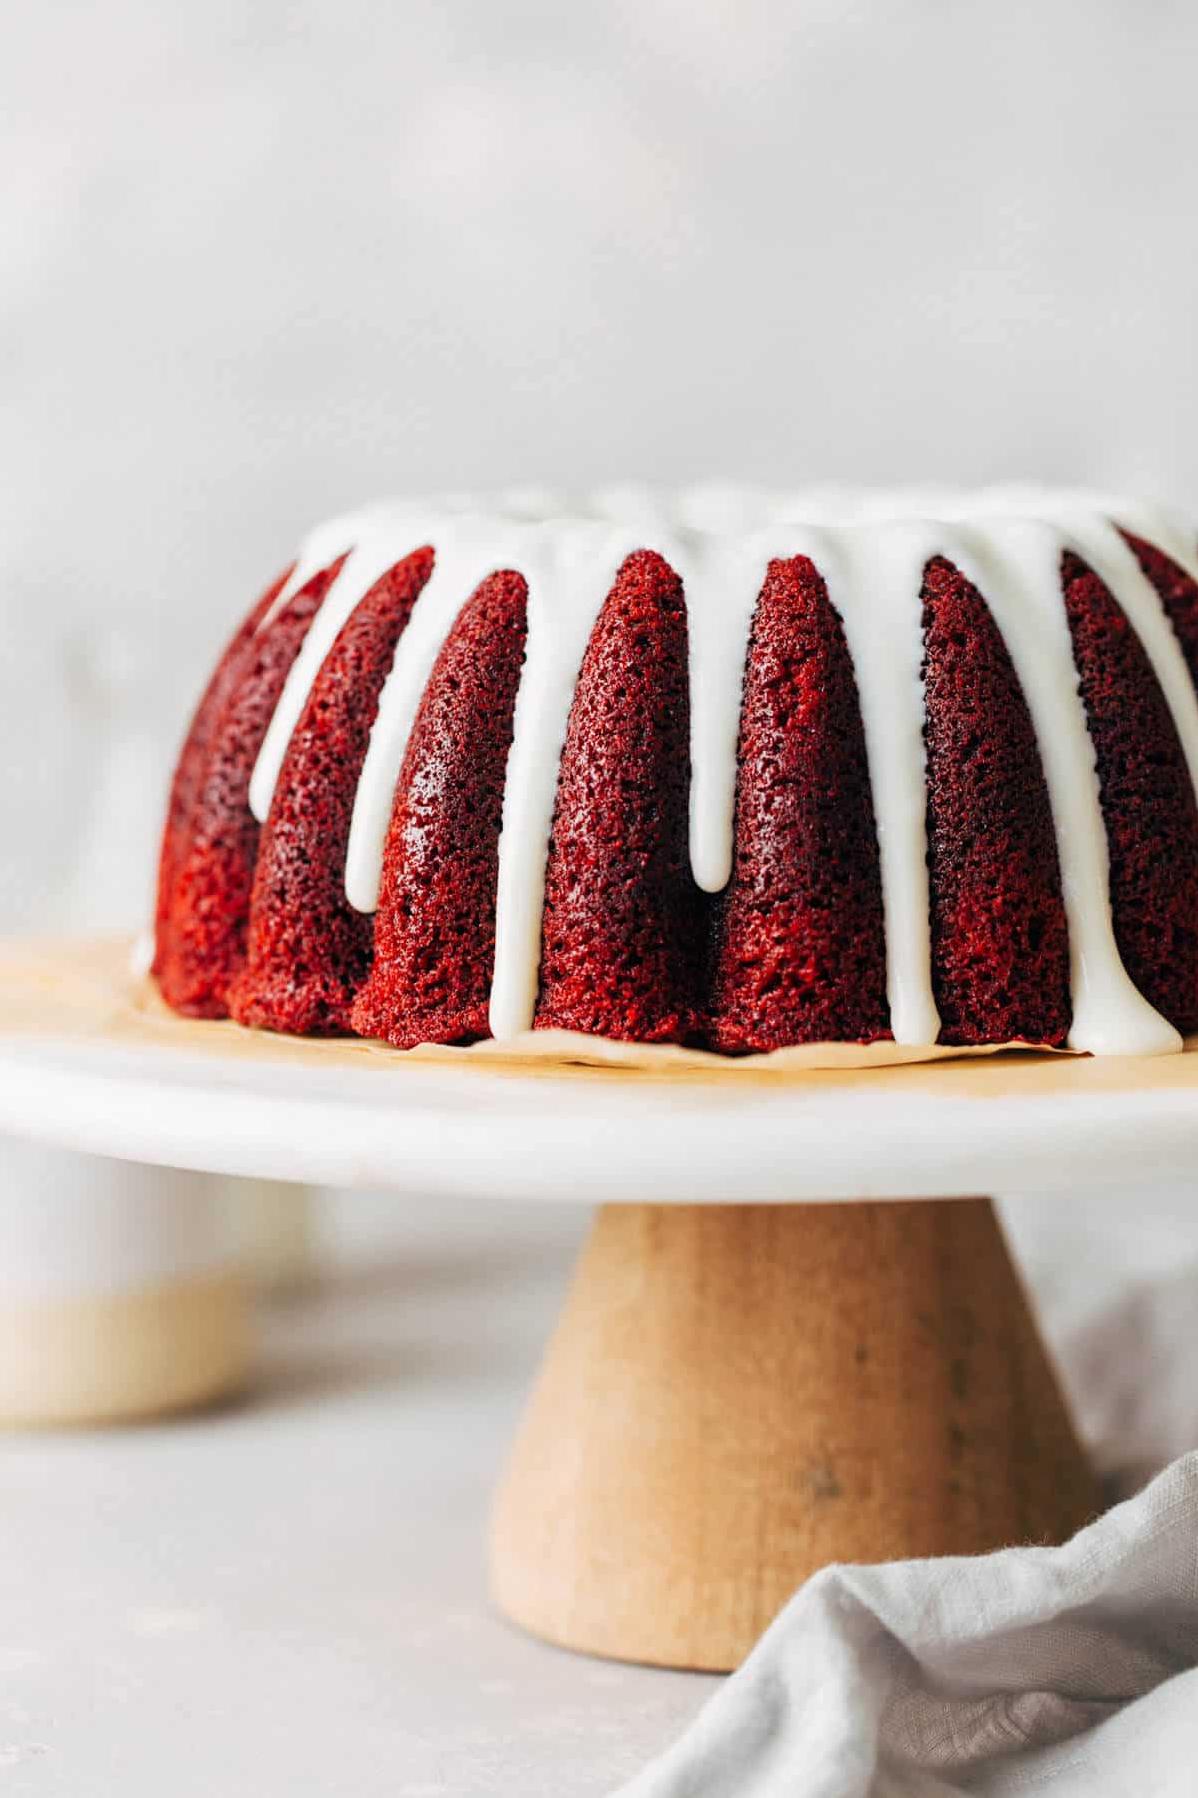  The moist and velvety texture of the cake will have you craving for more.